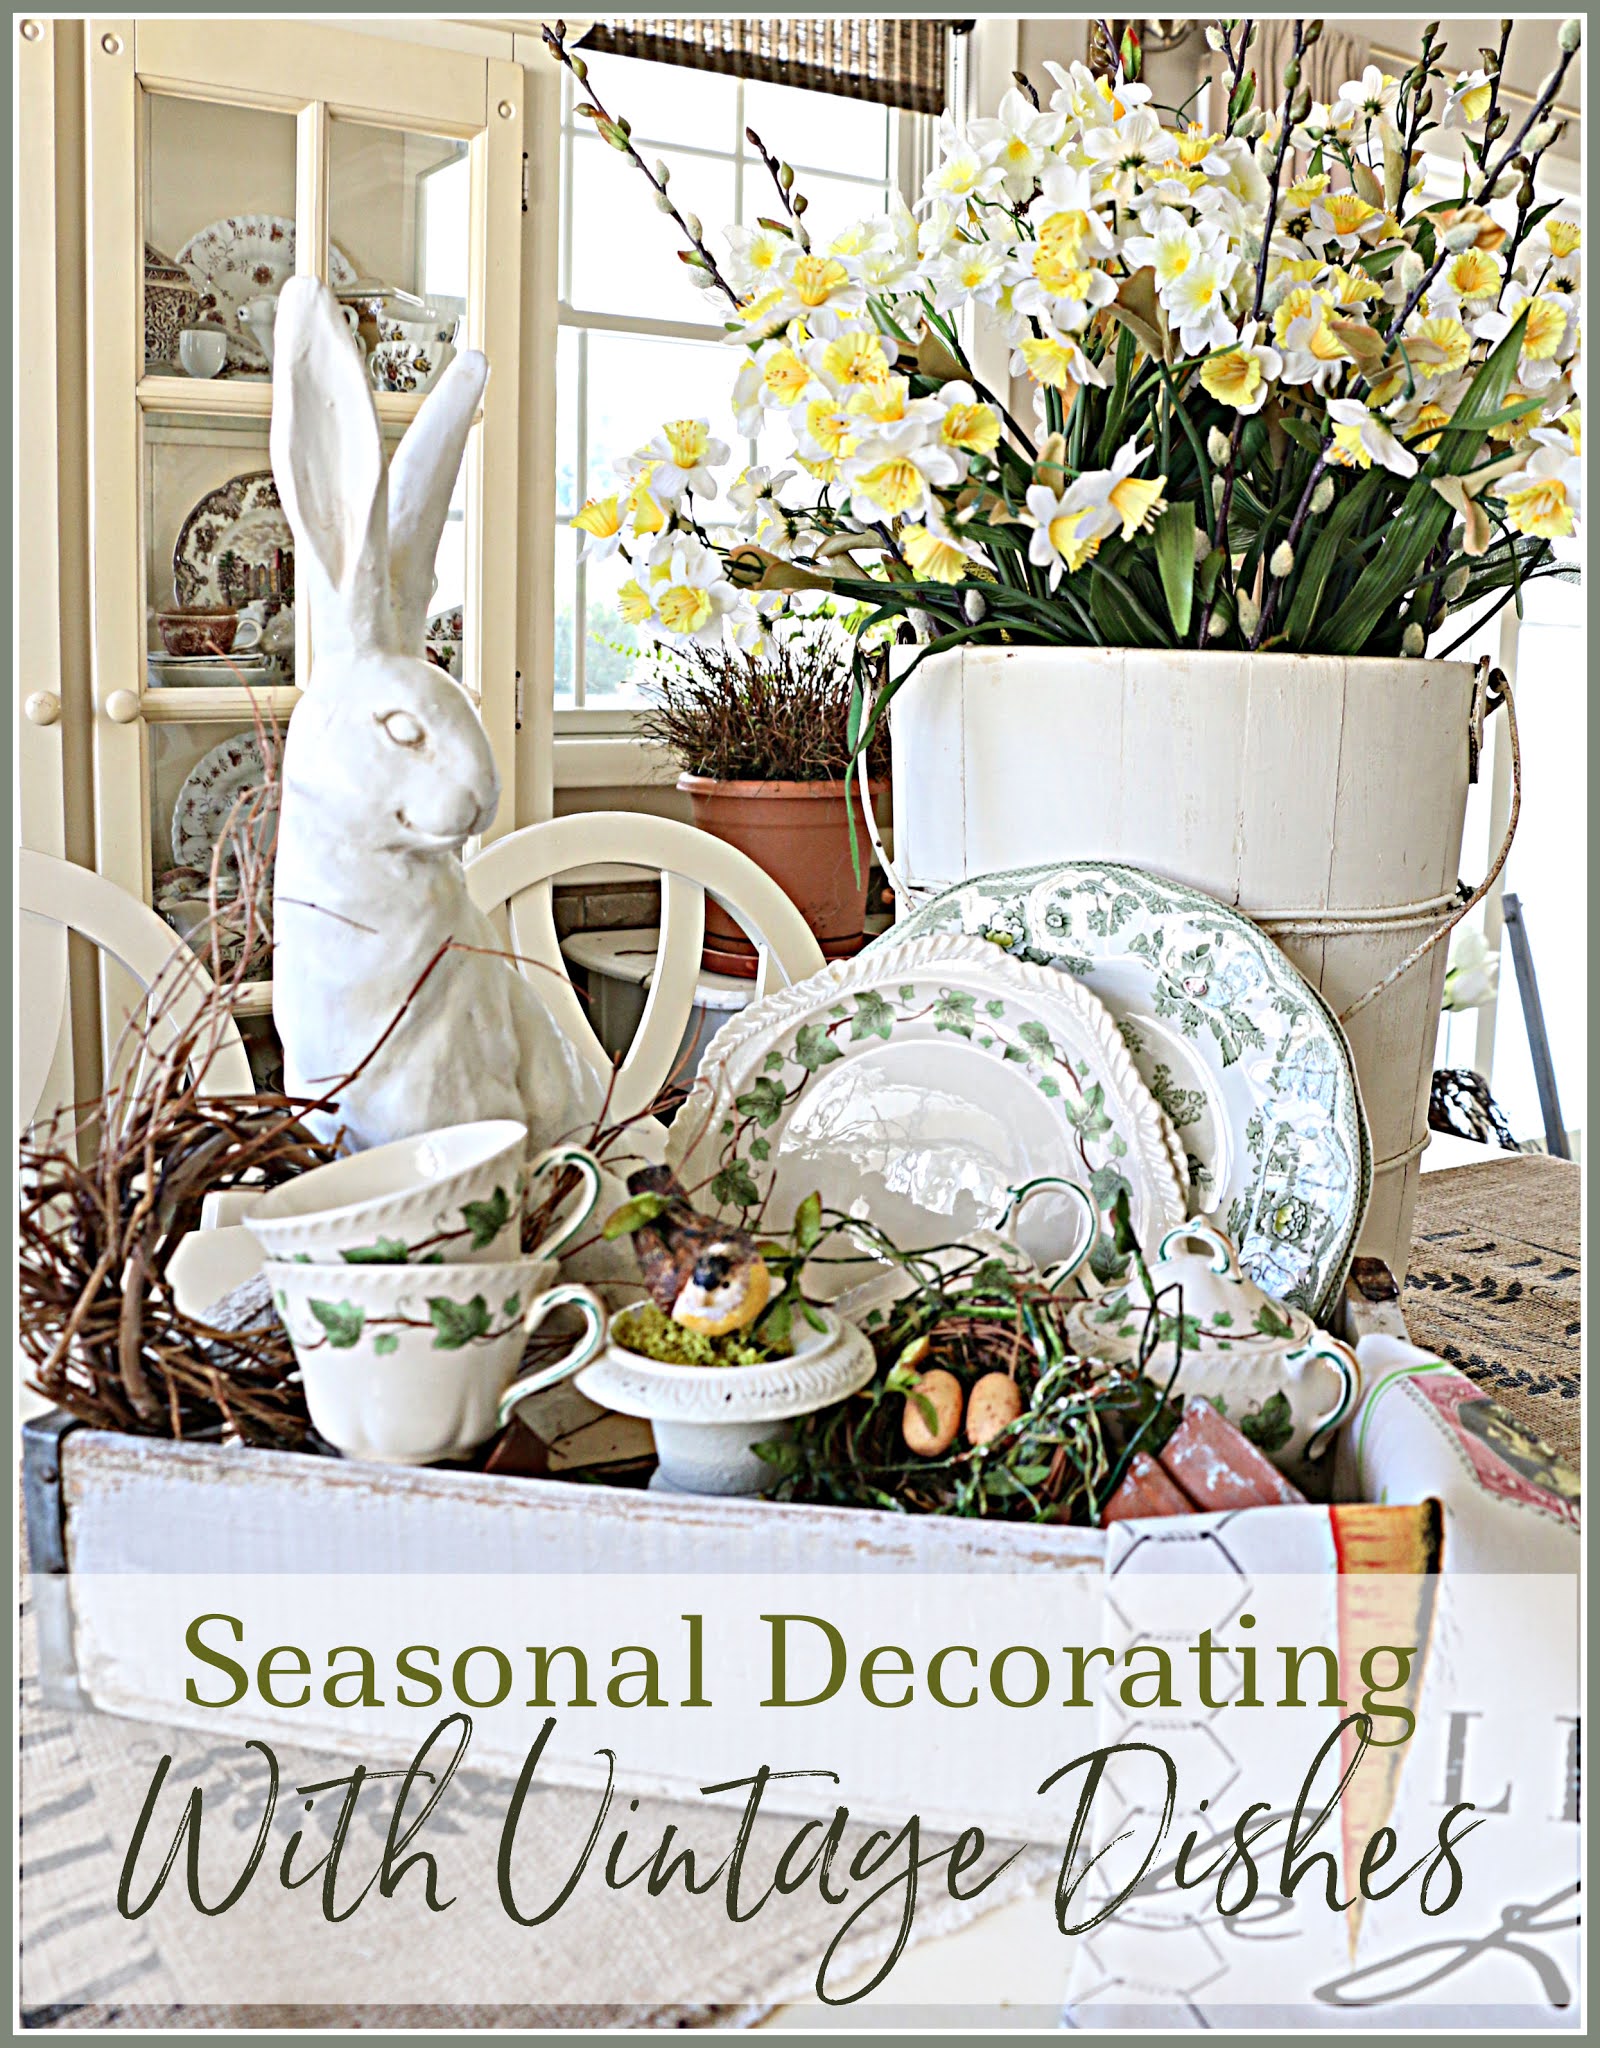 common ground : Using Vintage Dishes in Seasonal Decorating Hop